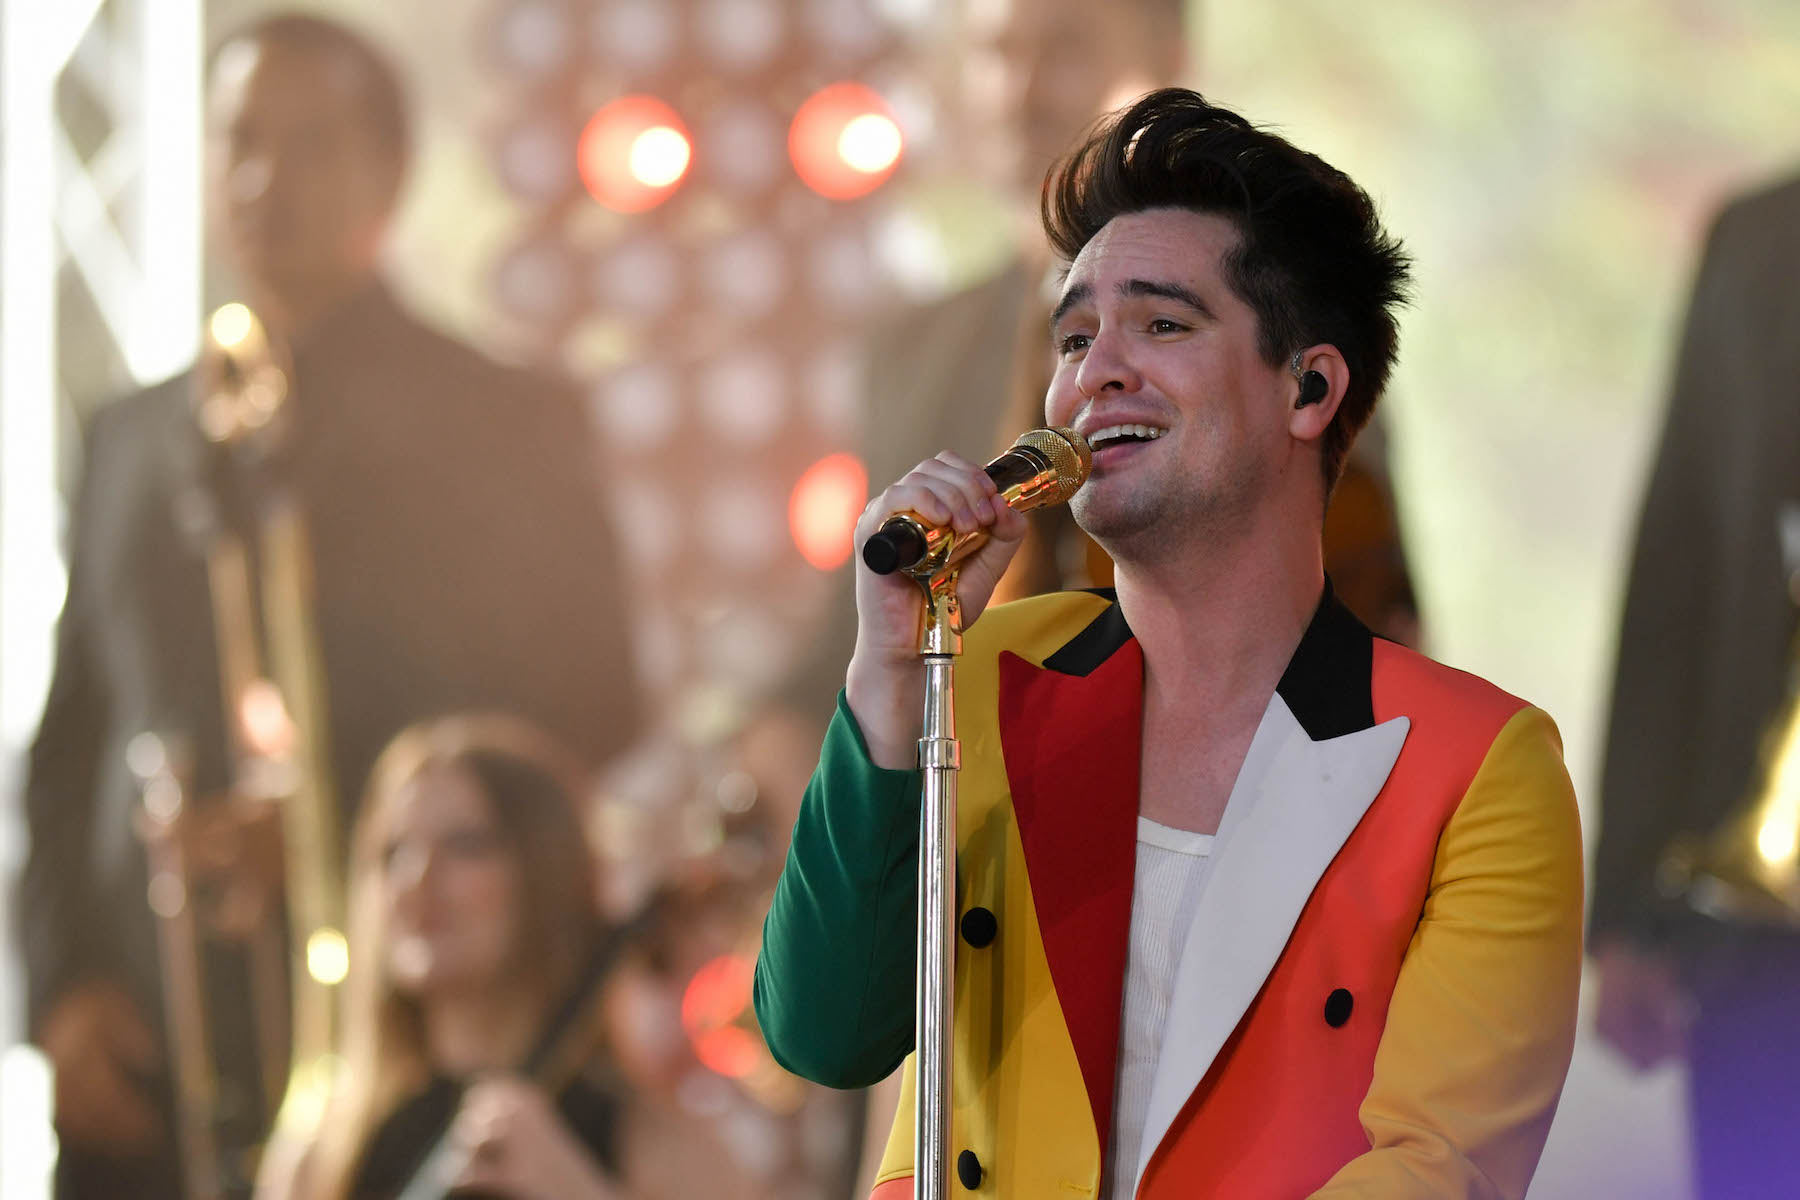 Brendon Urie of Panic! at the Disco on stage